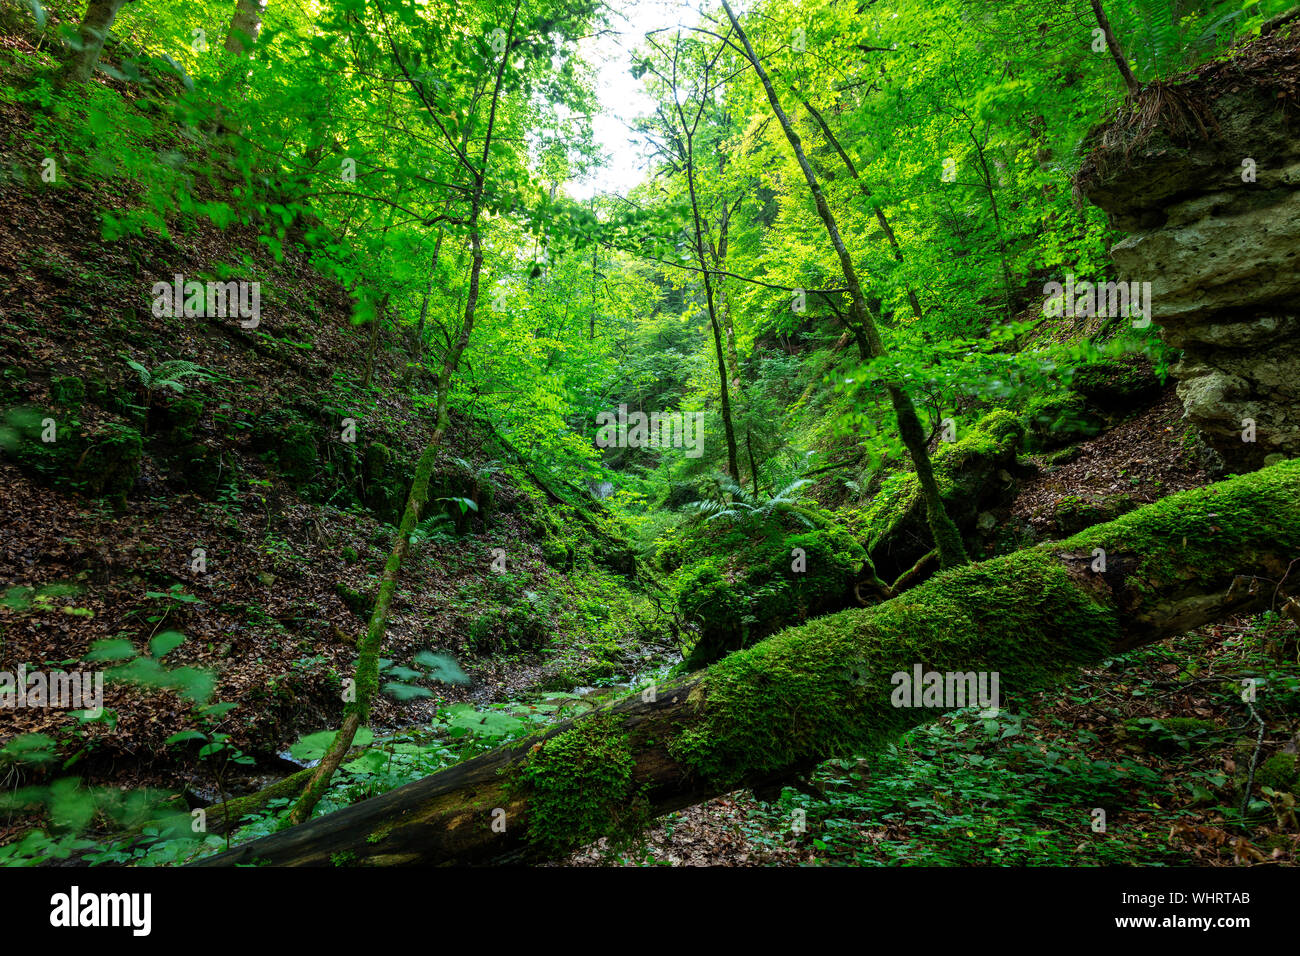 Dead wood in the Wutachschlucht nature reserve, Black Forest, Baden-Wuerttemberg, Germany Stock Photo